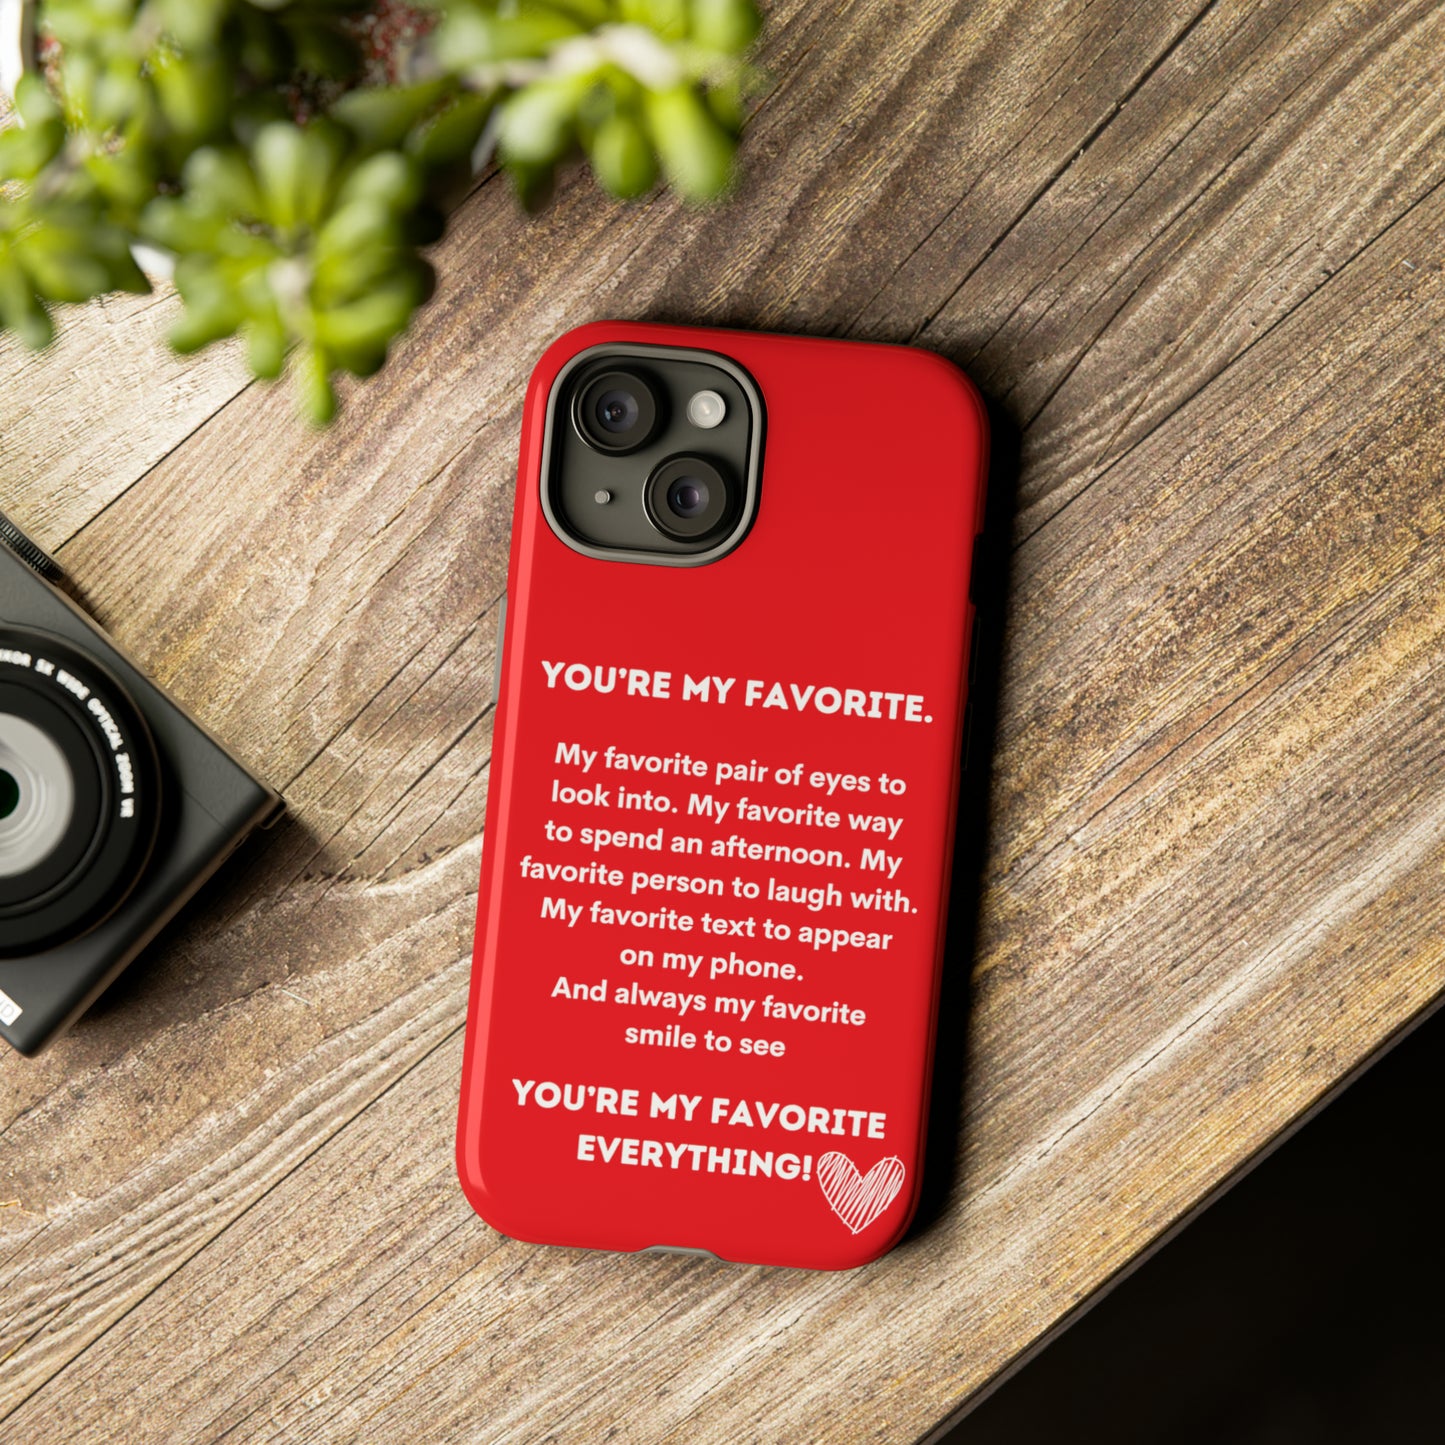 You're My Favorite Everything!  Phone Case